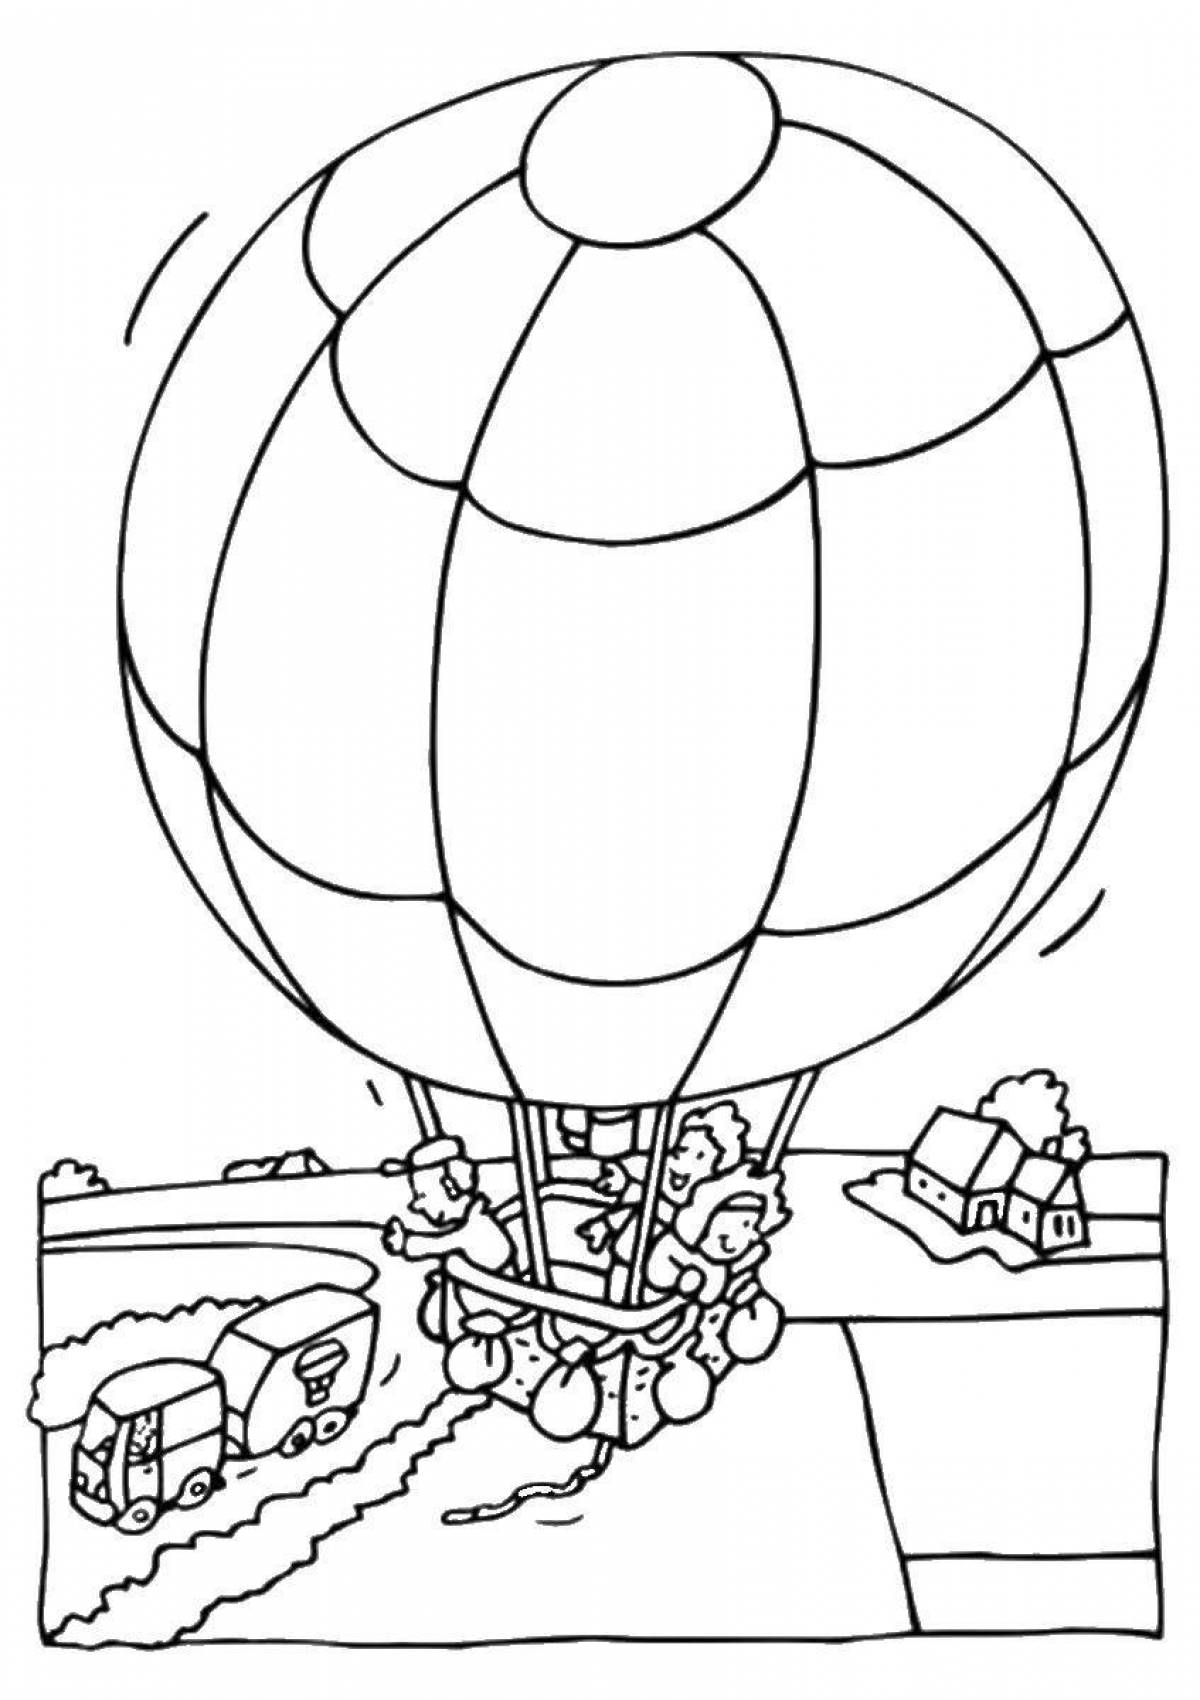 Great balloon coloring book for kids